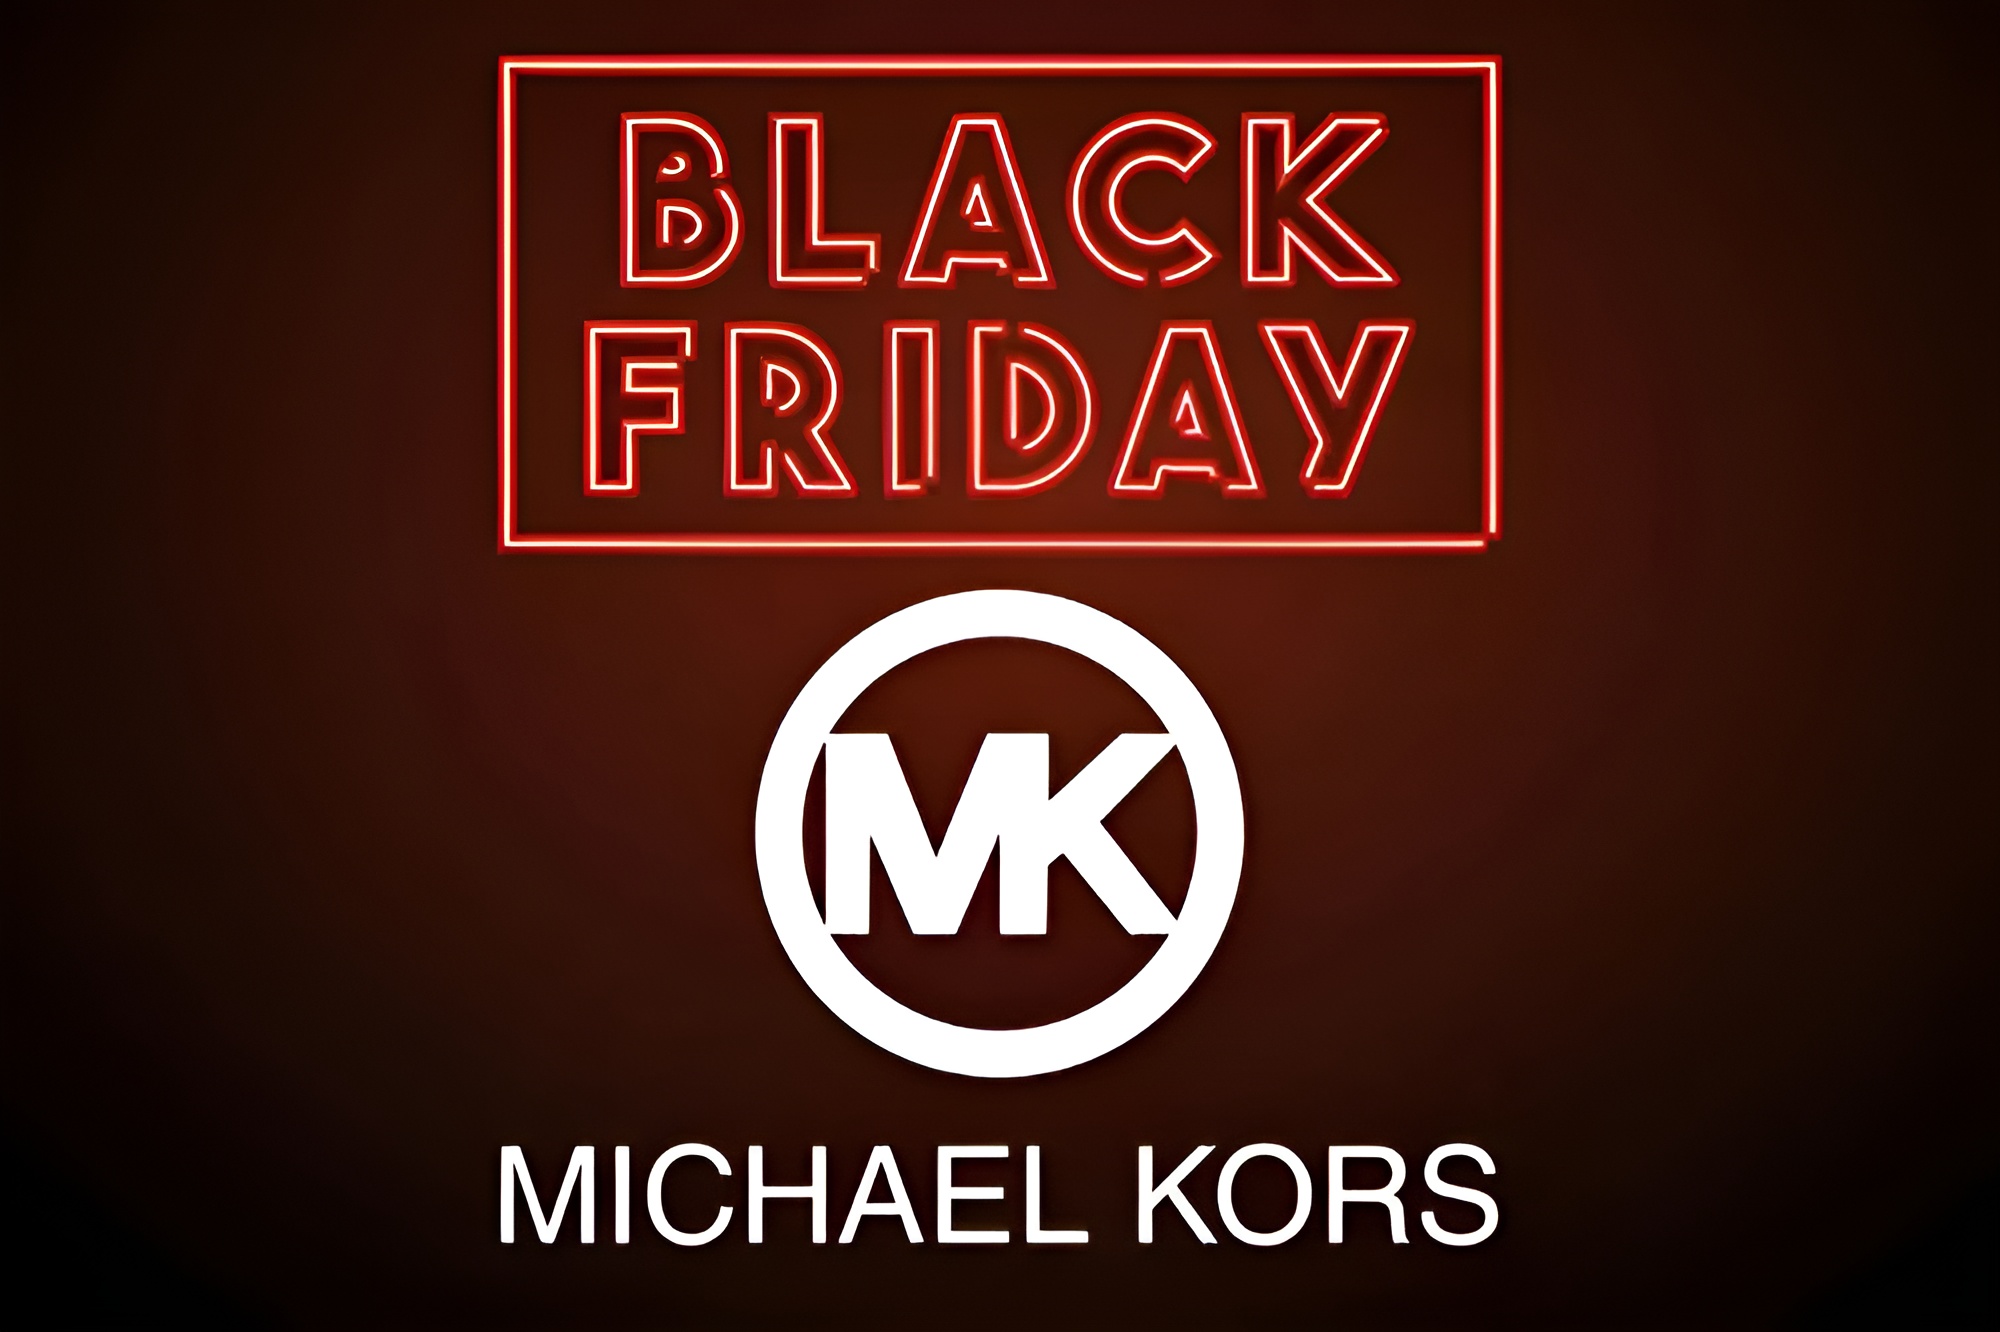 Best Michael Kors Black Friday Deals in 2023: Bags, Watches, Shoes & More at 50% Off